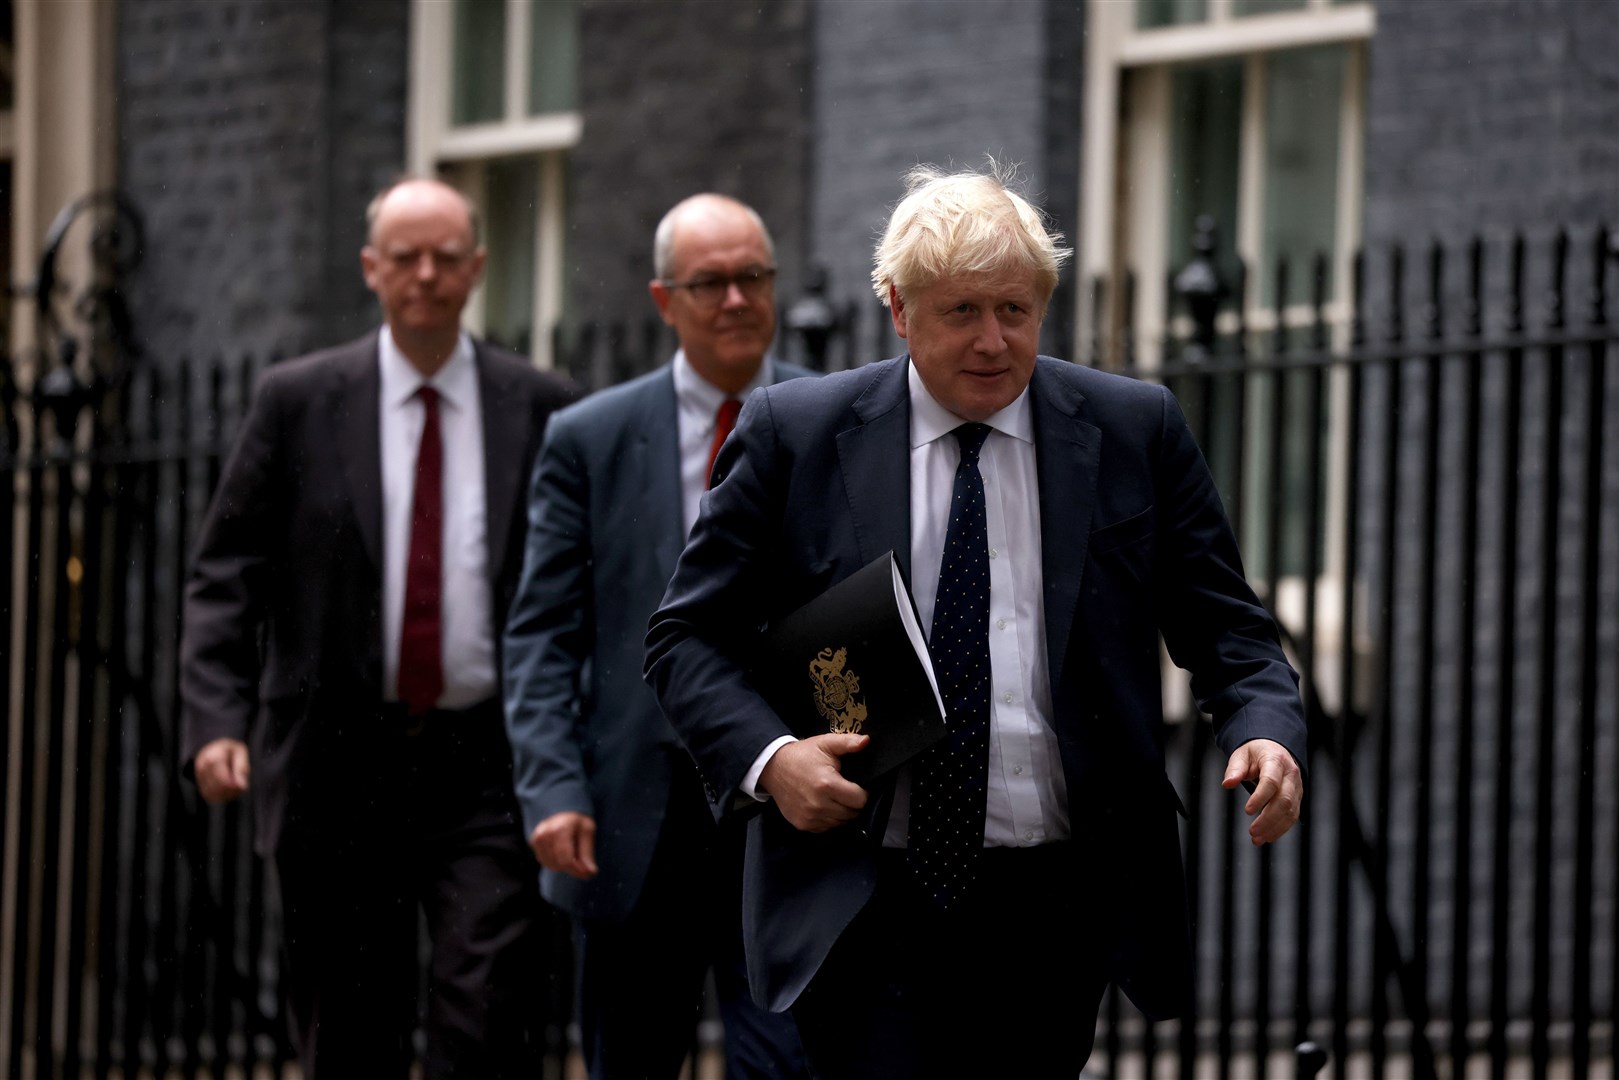 Sir Chris Whitty, Sir Patrick Vallance and then prime minister Boris Johnson leaving 10 Downing Street, London, ahead of a Covid-19 media briefing (Dan Kitwood/PA)